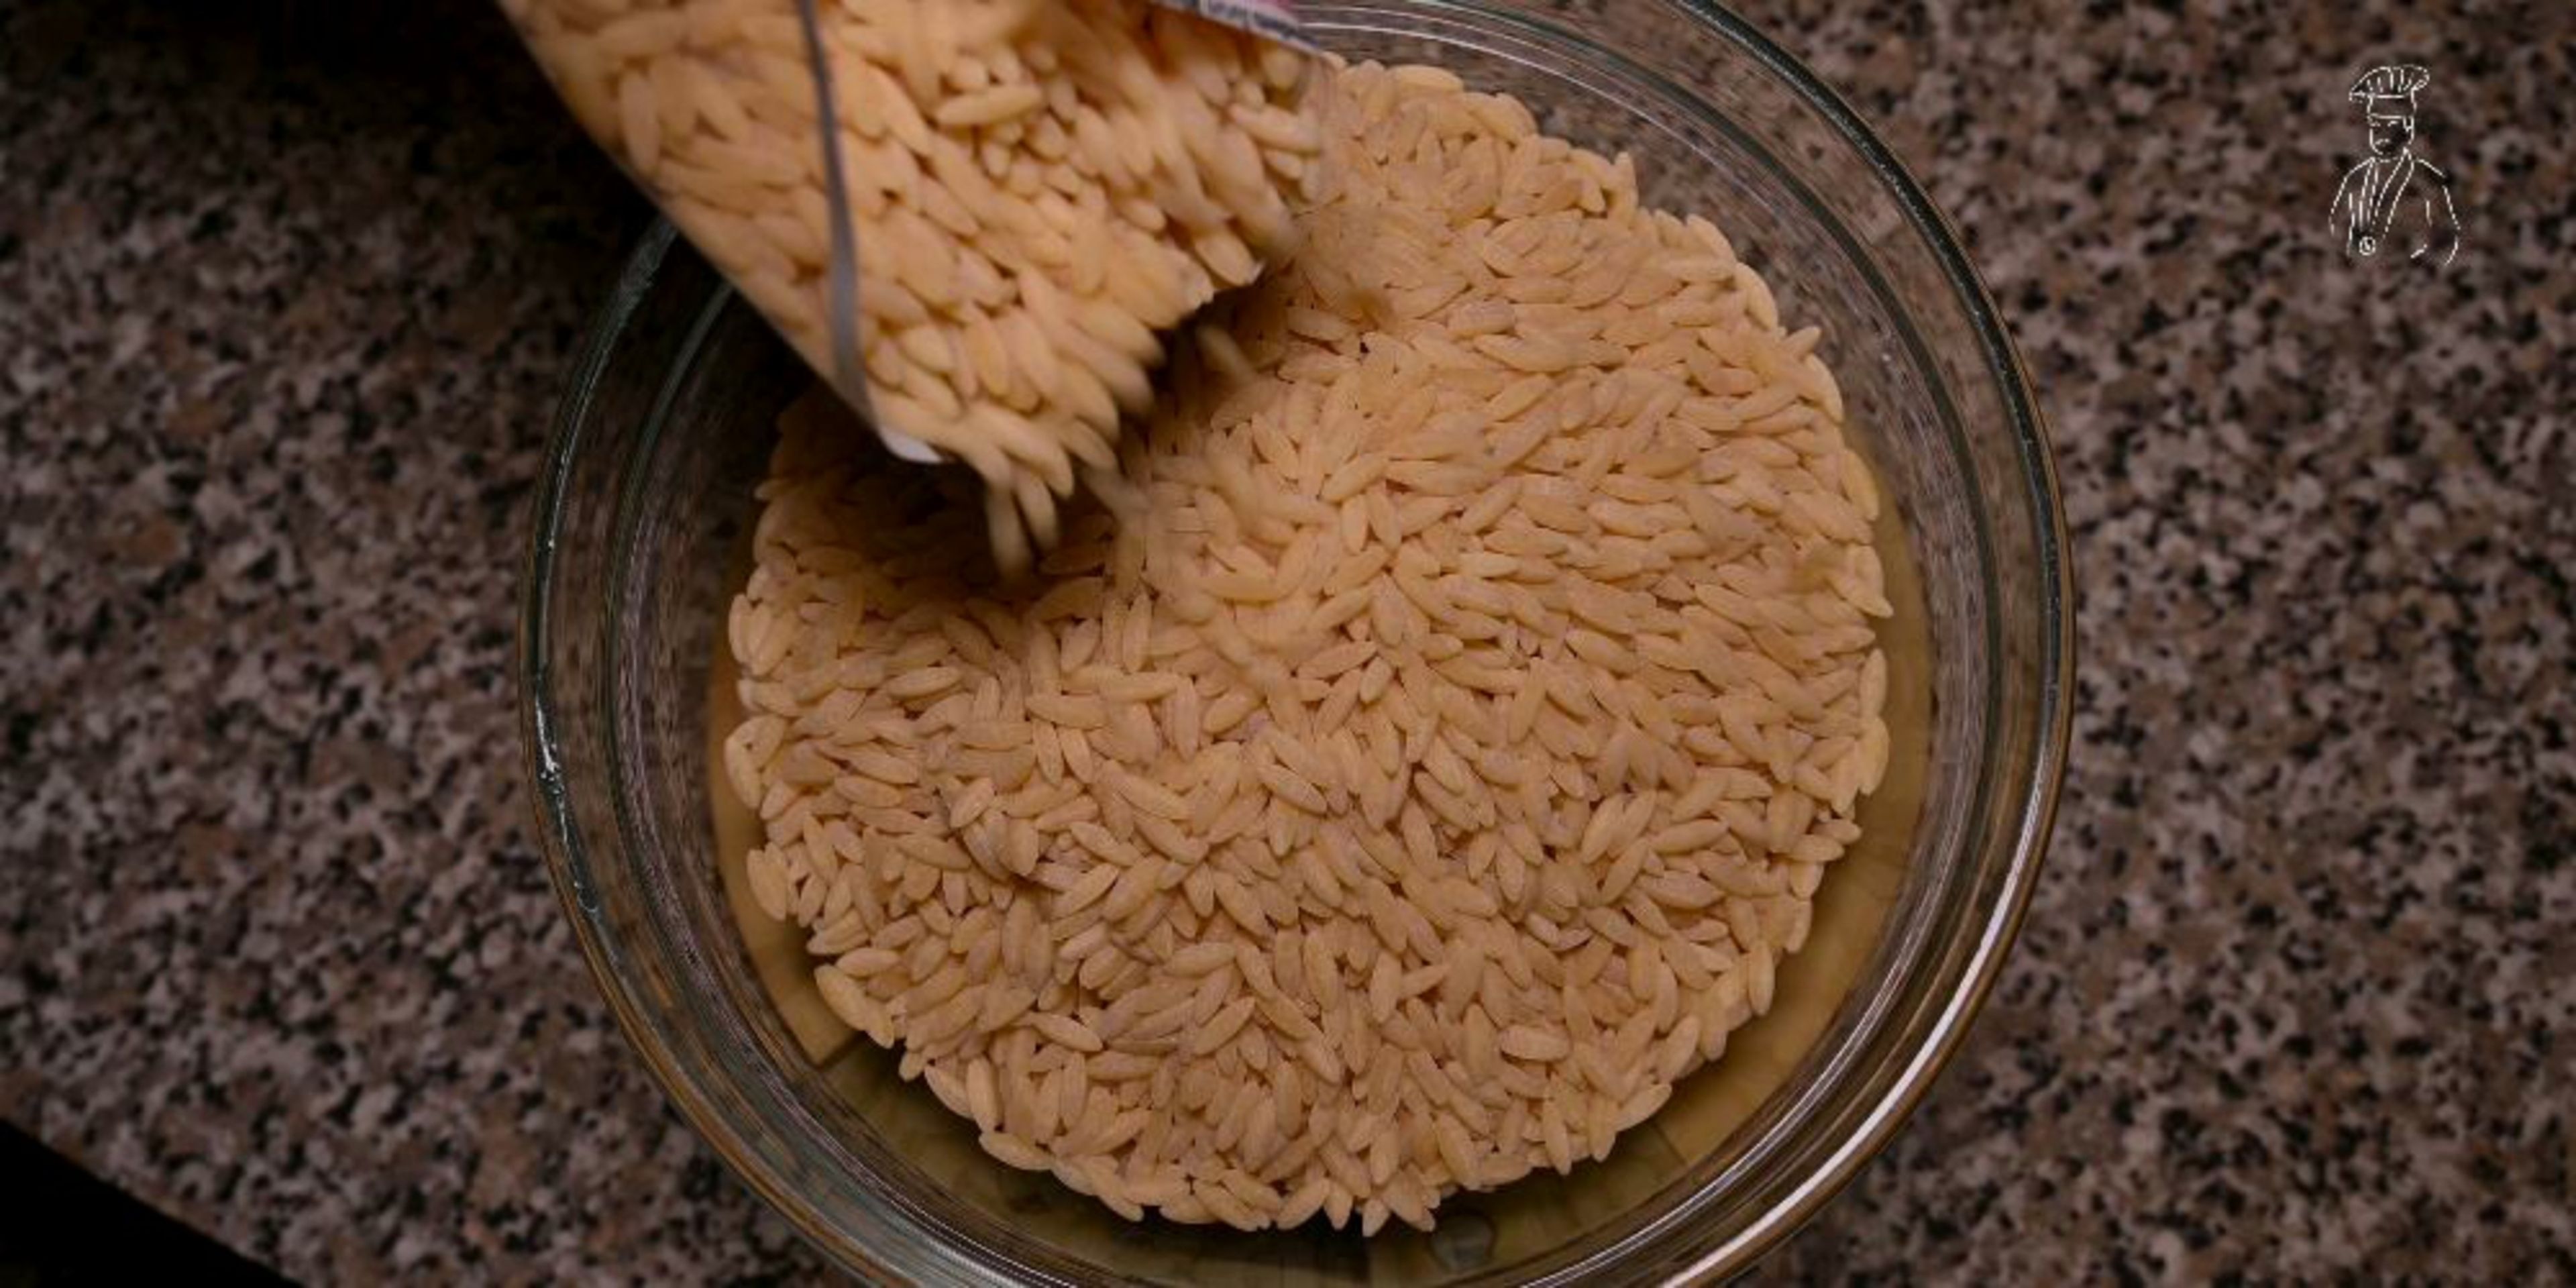 Cook the Orzo pasta in boiling water for 10-12 minutes, till the pasta is cooked and has a soft texture. 

Once the Orzo pasta is cooked, strain the water.